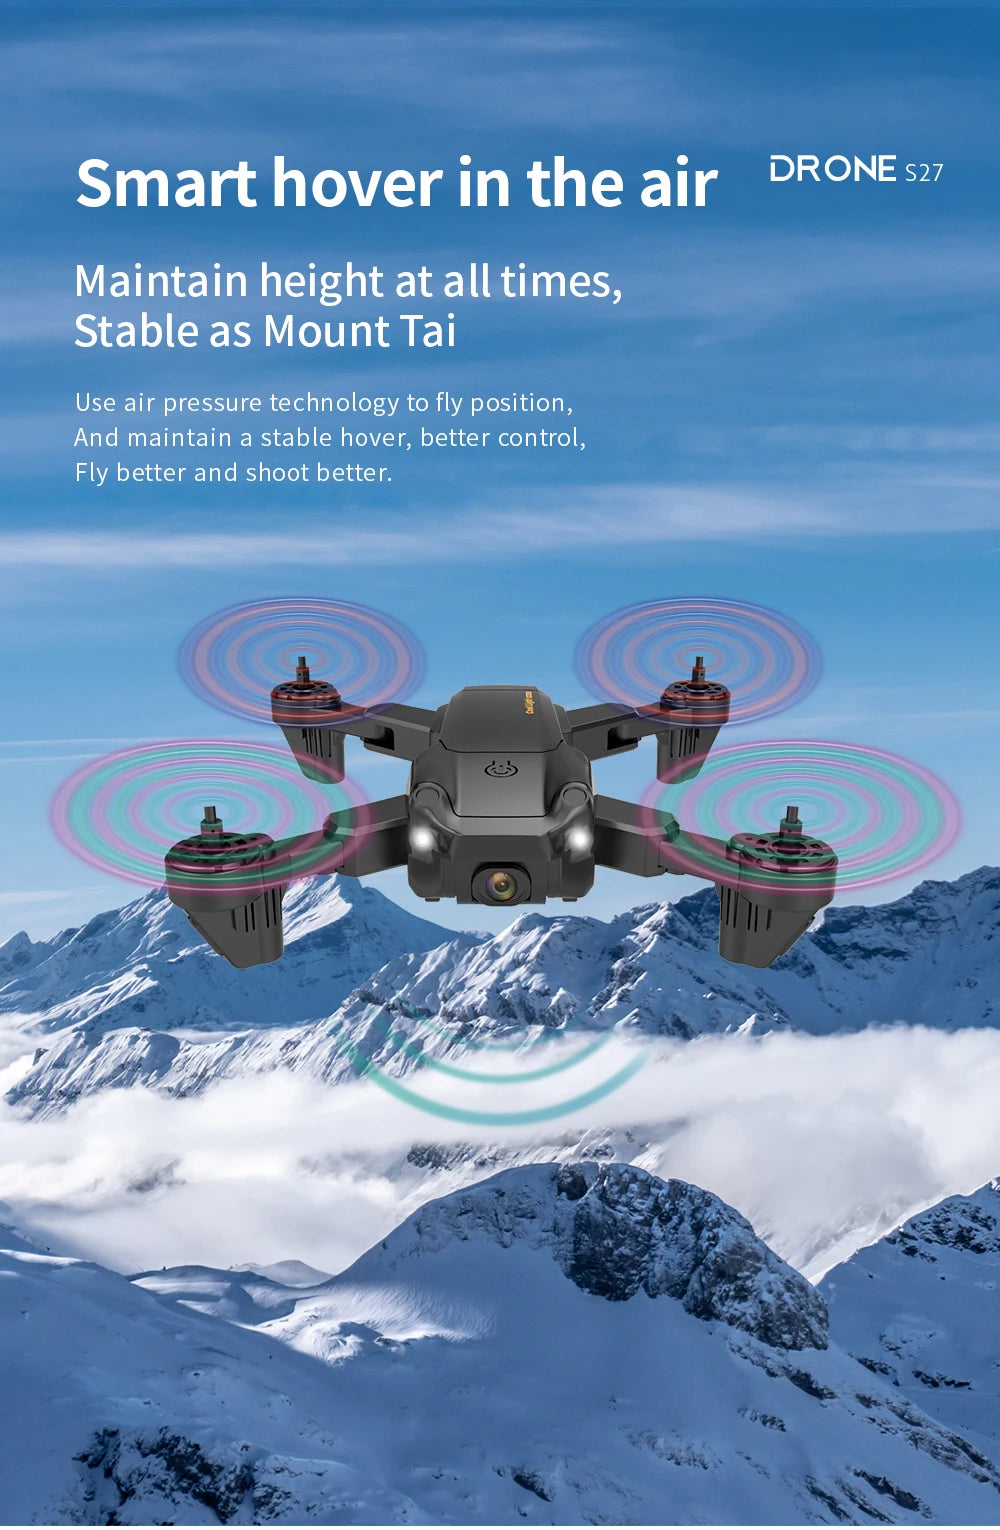 S27 Drone, smart hover in the air drone 527 maintain height at all times 